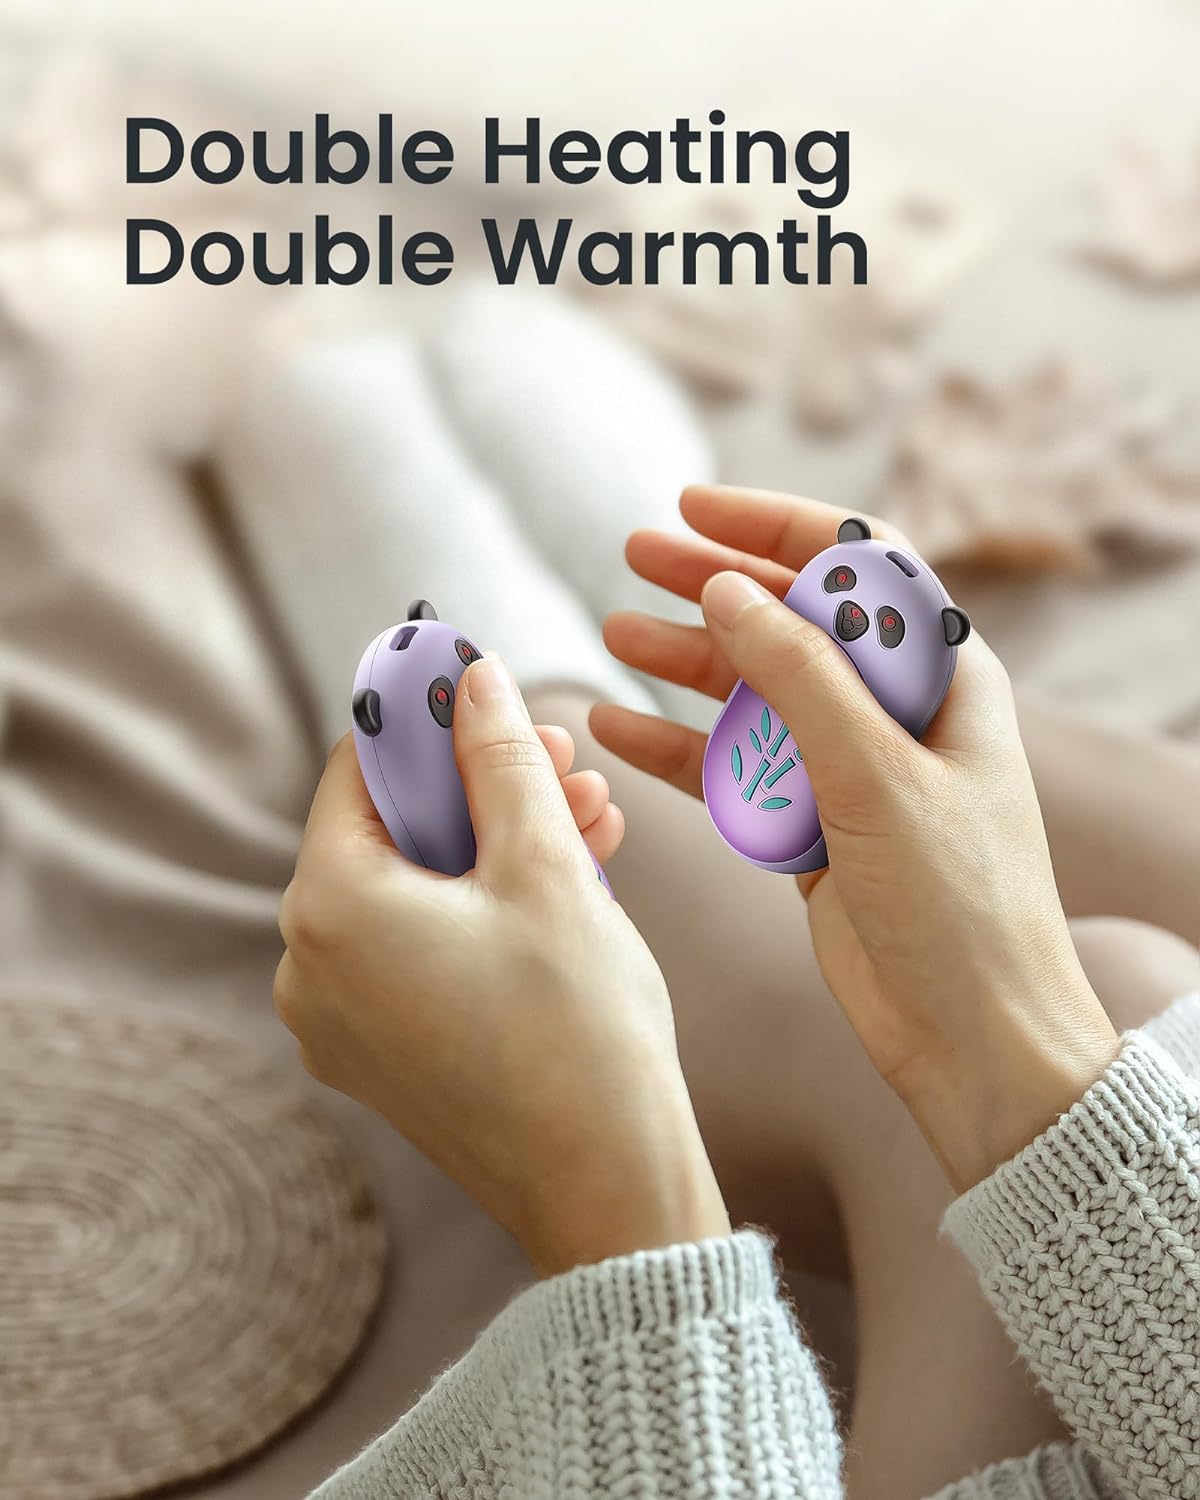 Hand Warmers Rechargeable 2 Pack, 6000mAh Electric Hand Warmer Reusable, 40Hrs Long Heating, Portable Pocket Heater Handwarmer Great Gift for Women Men, Outdoor Camping, Hunting Gear Hand Warmers